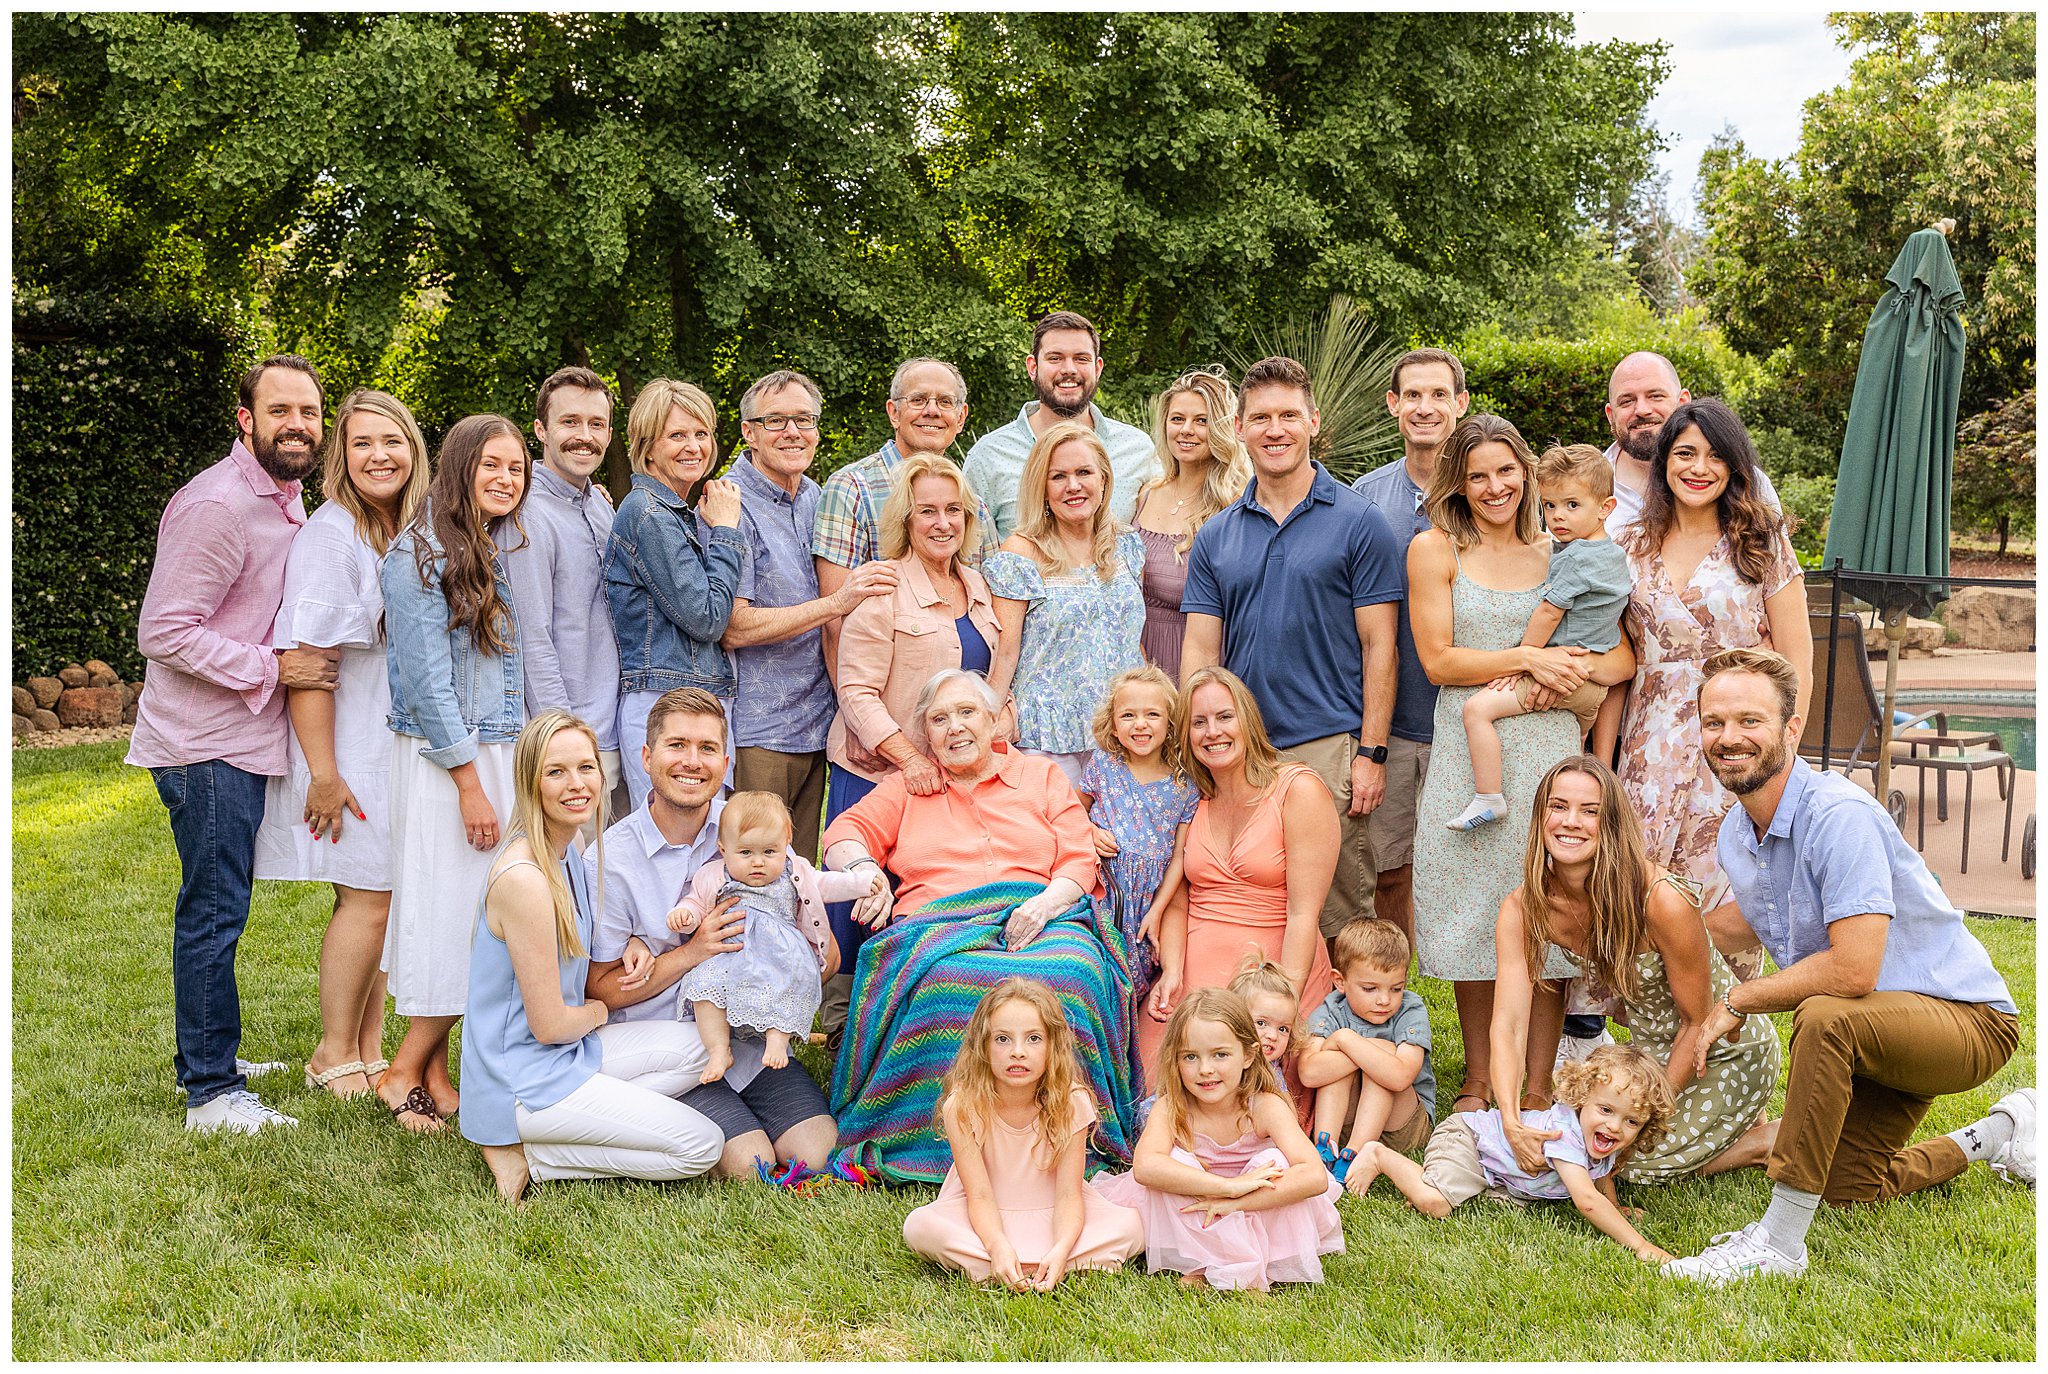 Large Extended Family Session at Private Residence for Grandma's 90th Birthday | Carla + Mark